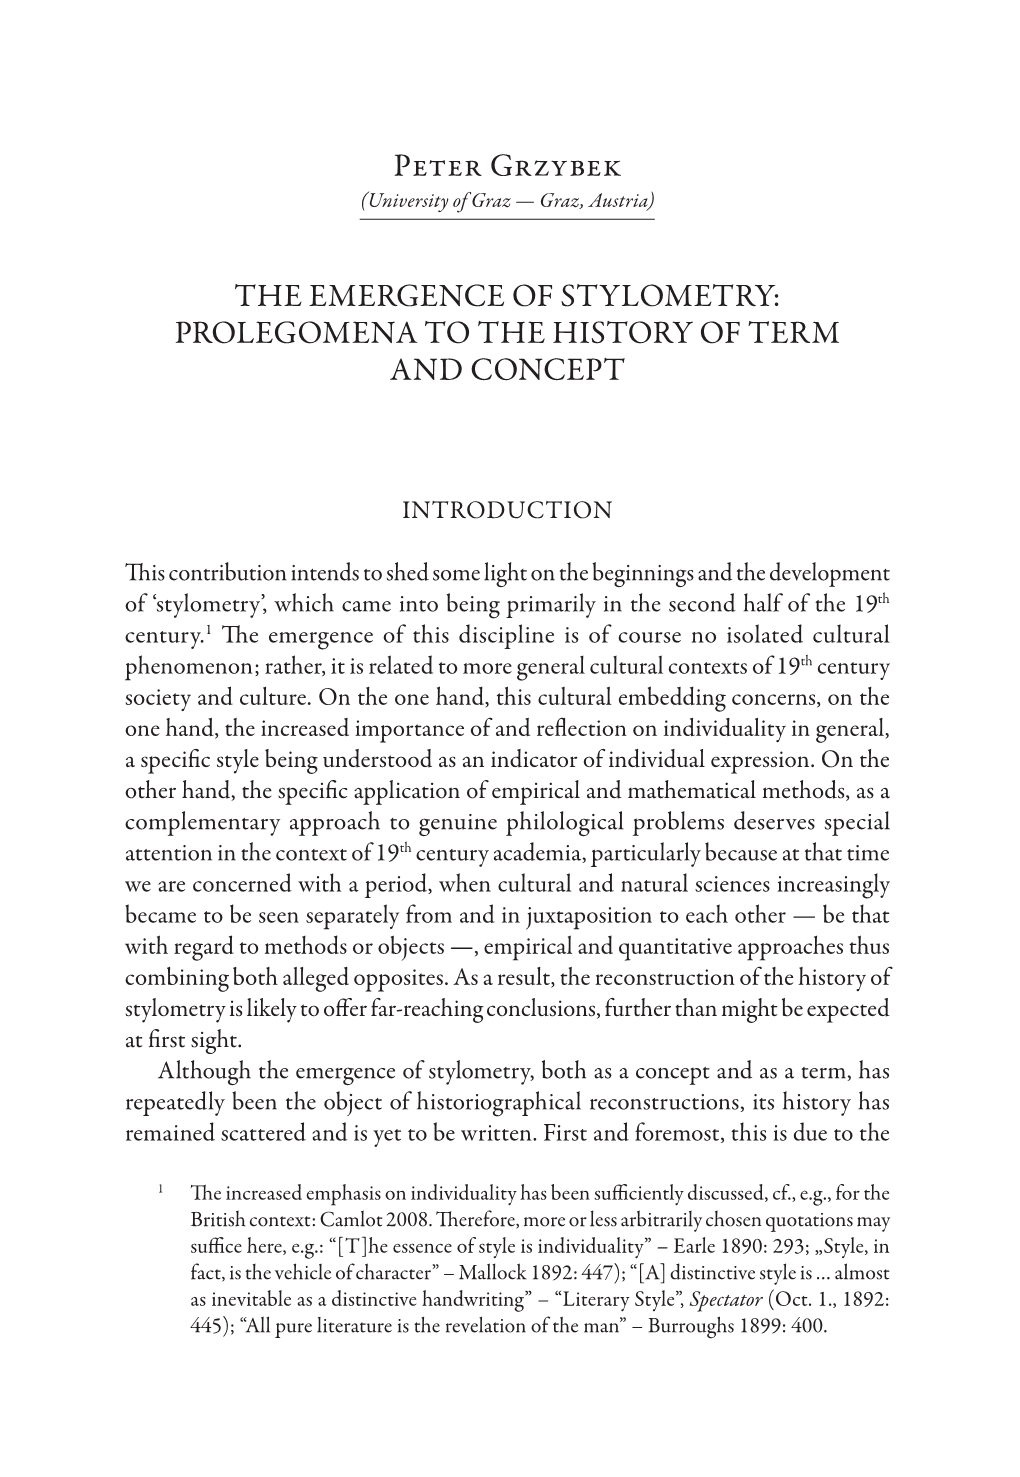 Peter Grzybek the Emergence of Stylometry: Prolegomena to the History of Term and Concept